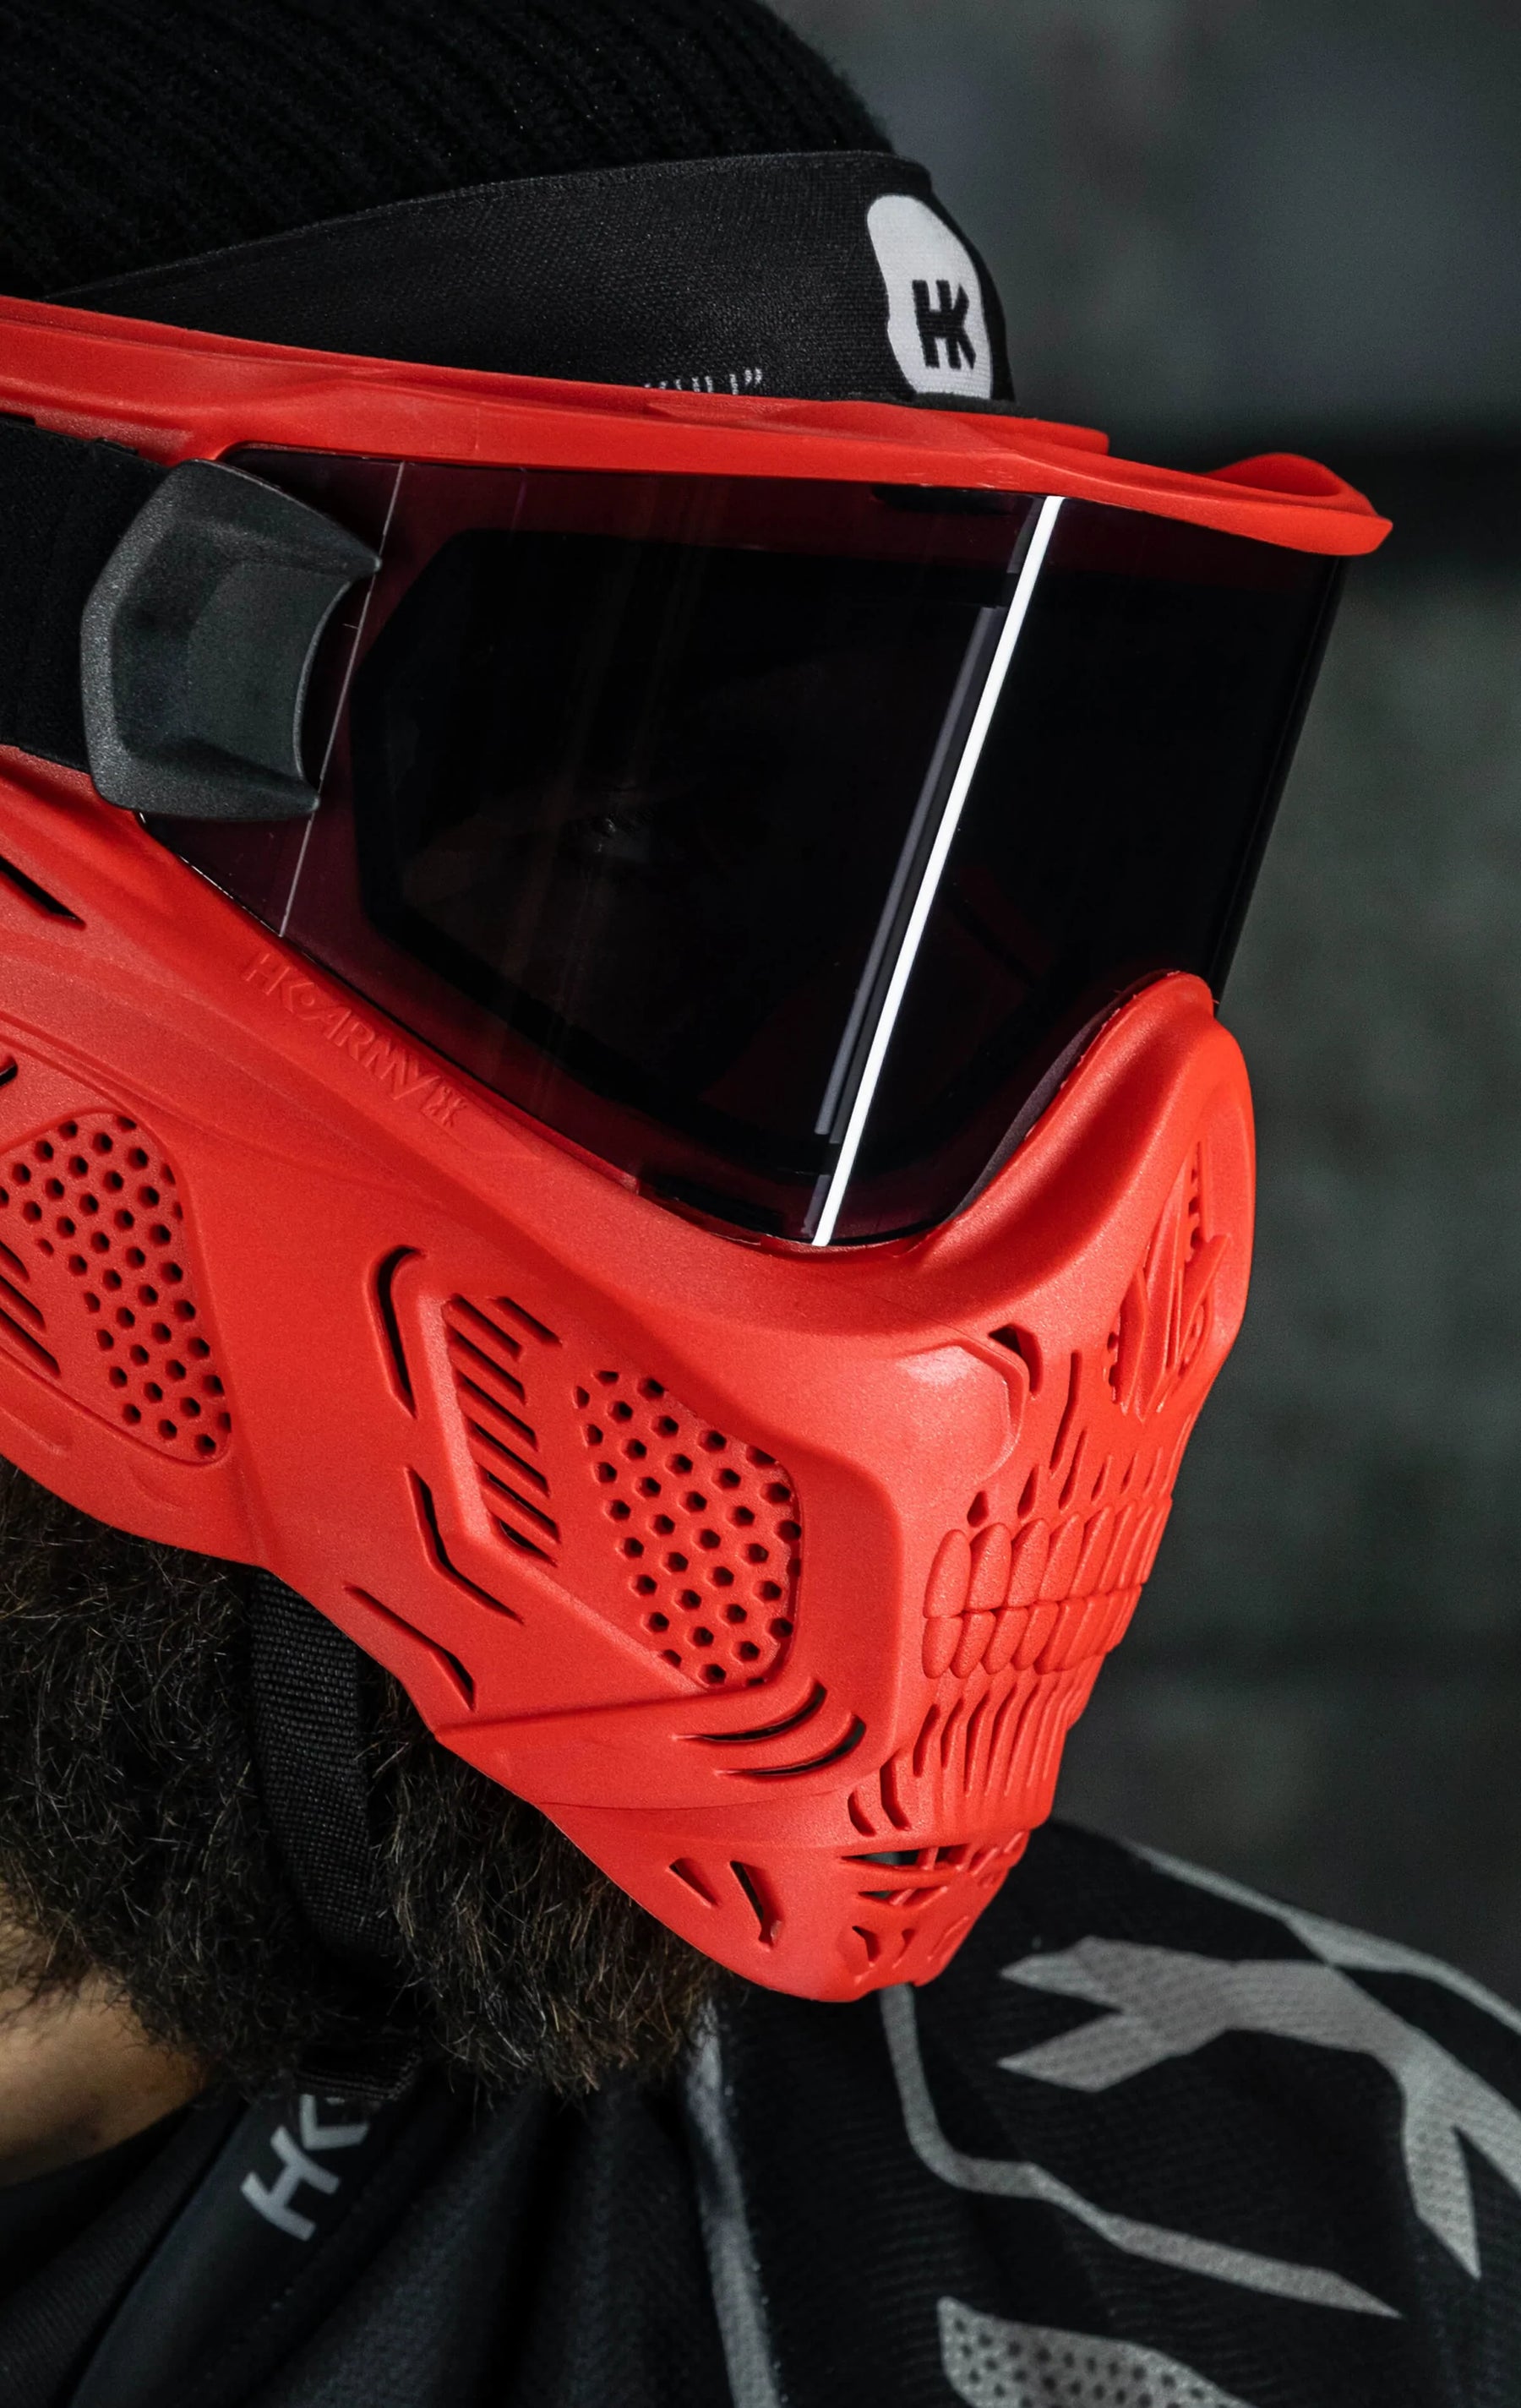 Hstl Skull Goggle "Sinner" - Red W/ Smoke Lens | Paintball Goggle | Mask | Hk Army